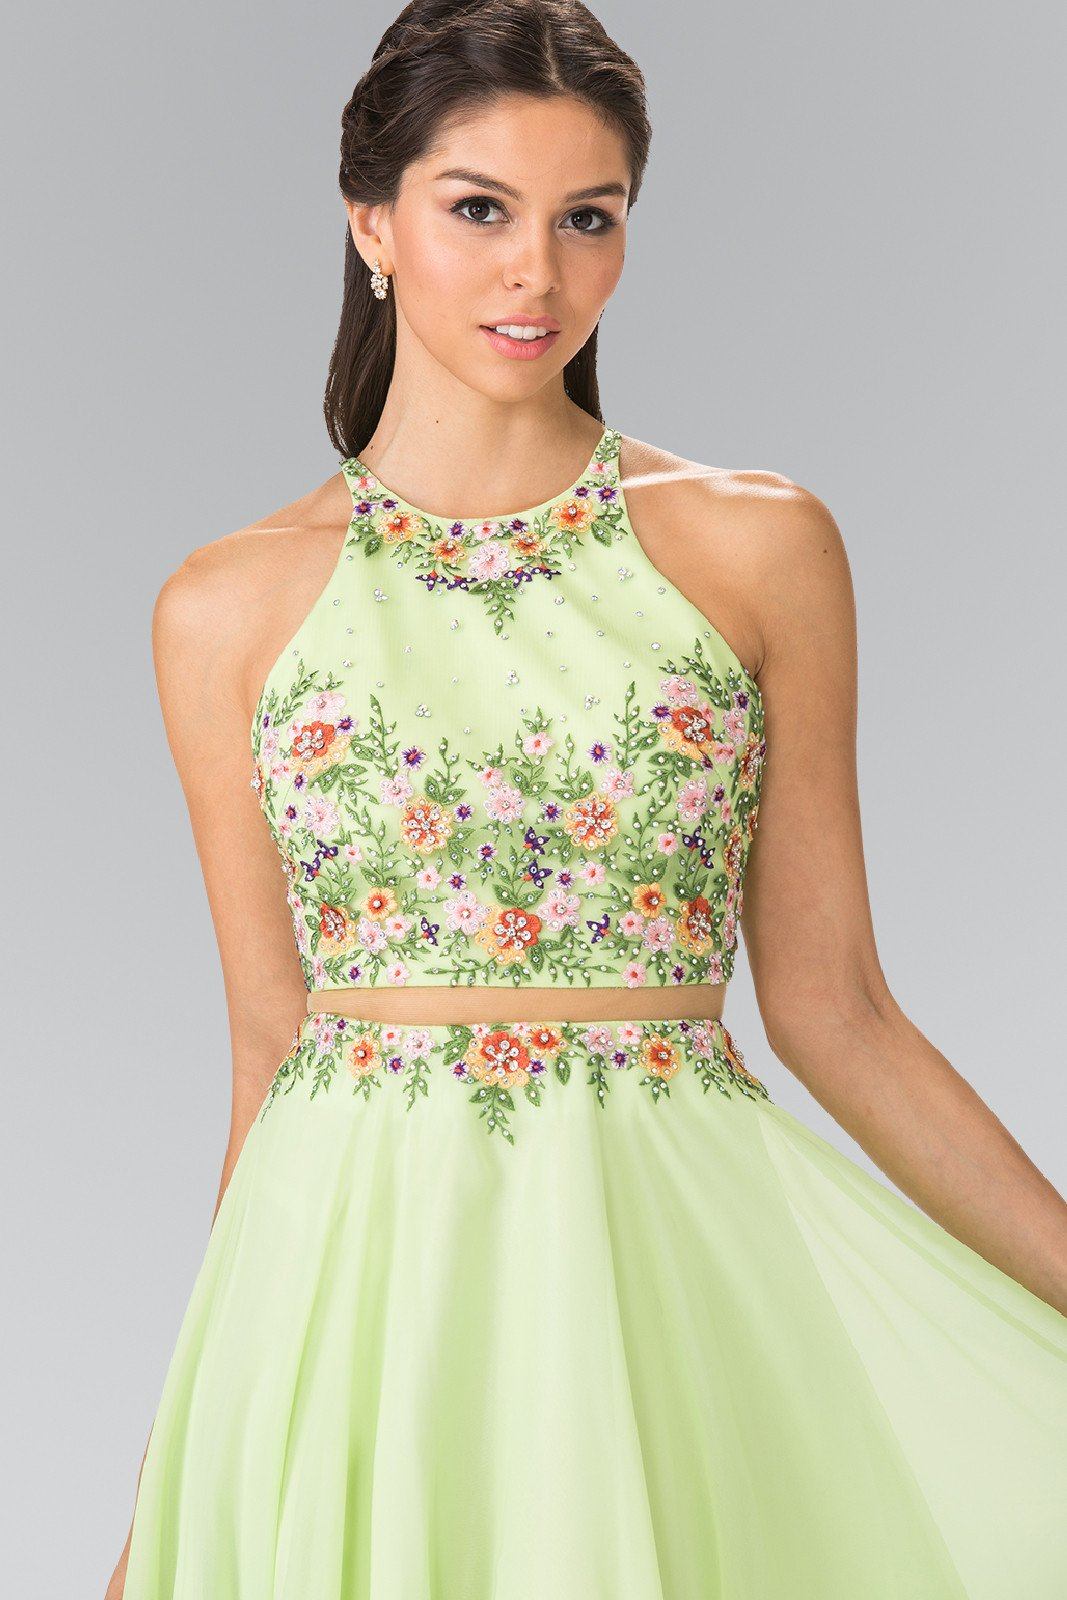 Long Mock Two-Piece Floral Embroidered Dress by Elizabeth K GL2340-Long Formal Dresses-ABC Fashion